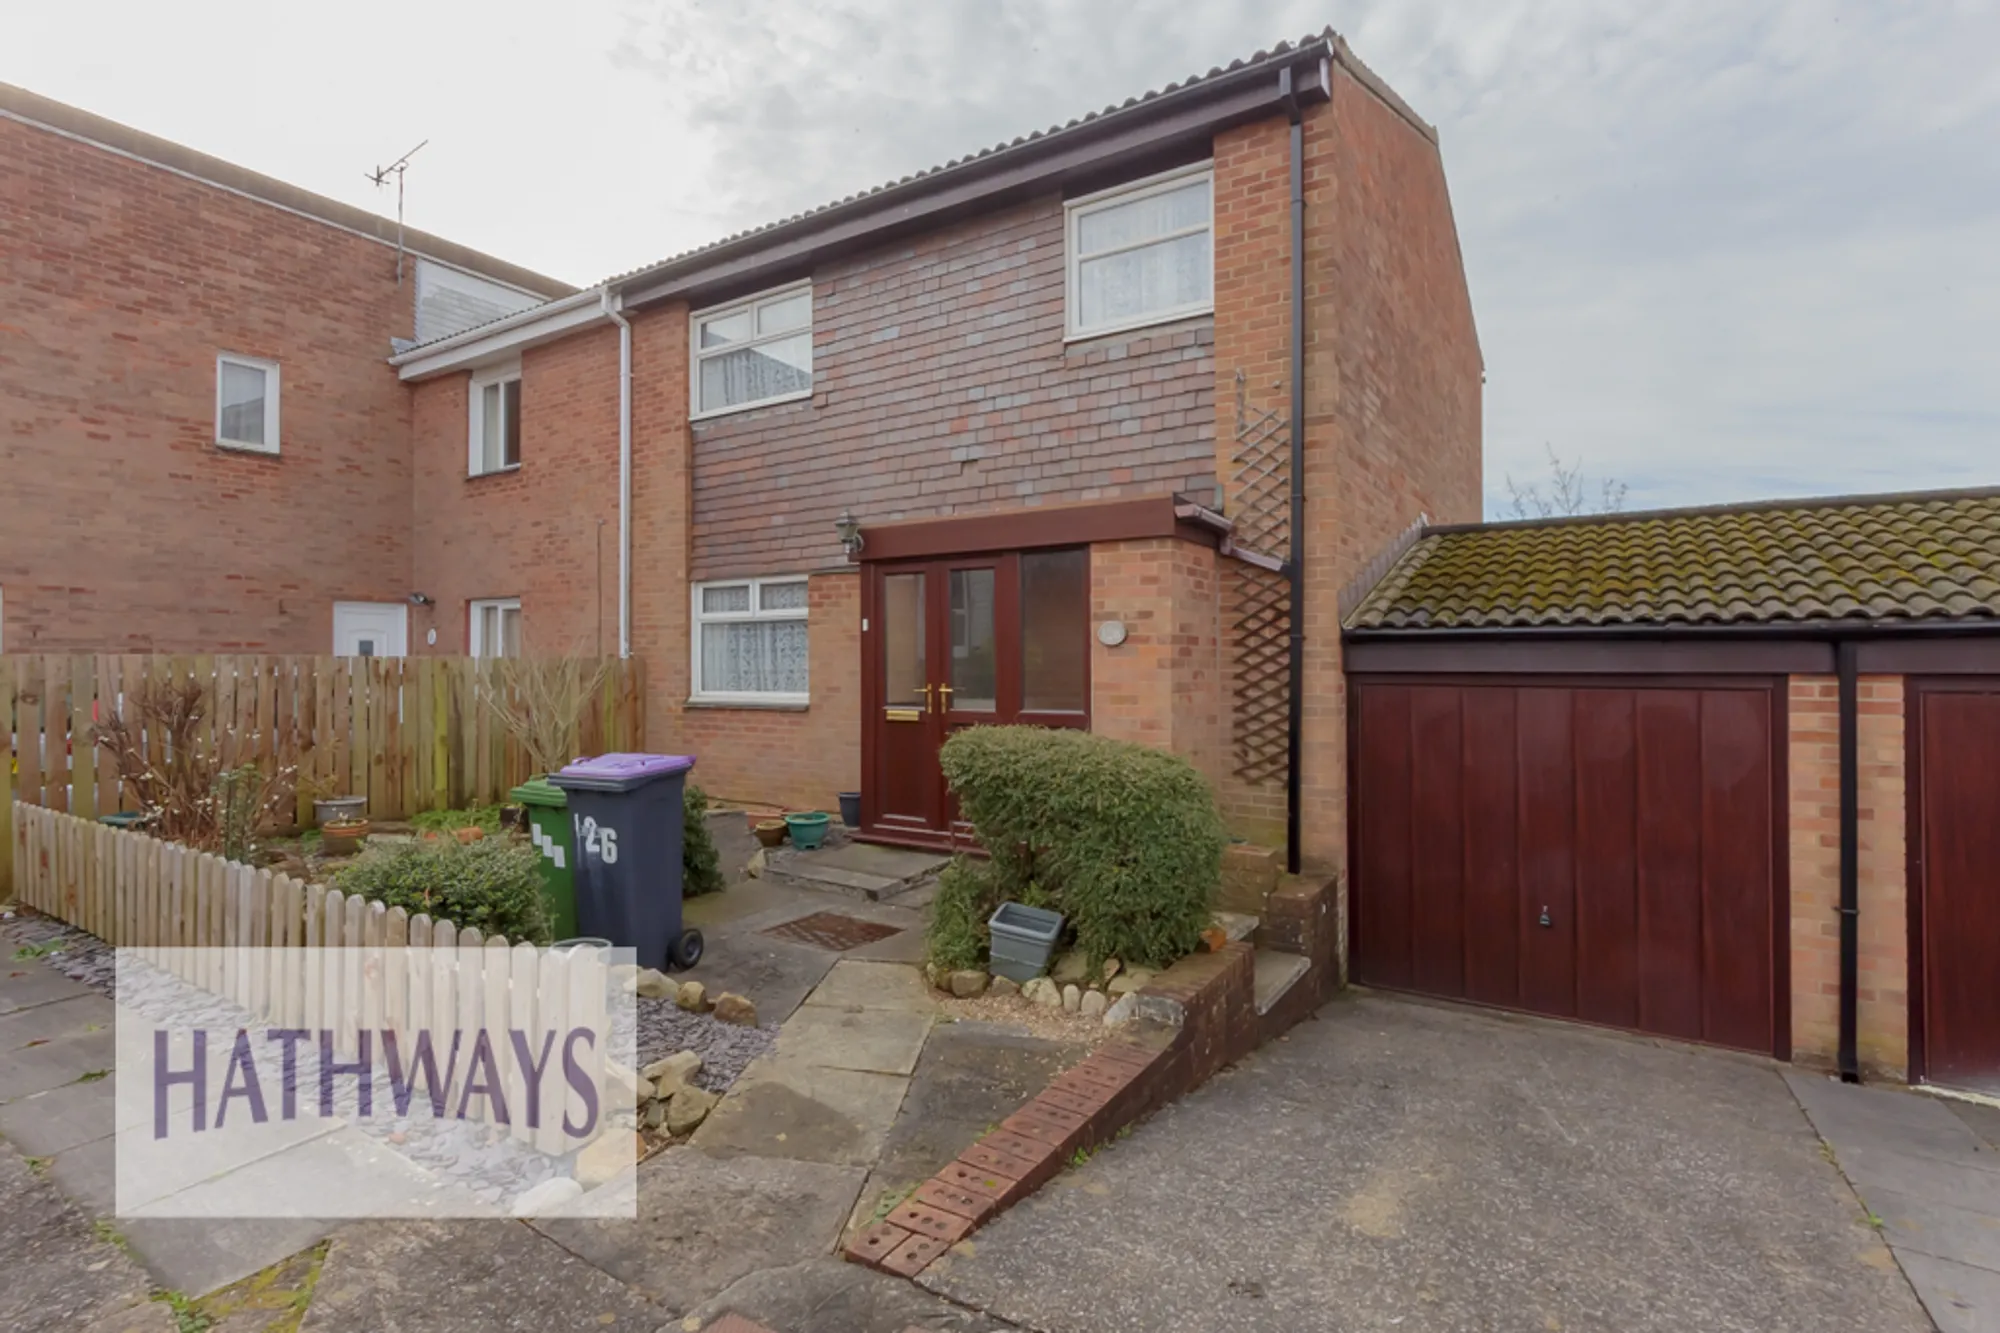 4 bed semi-detached house for sale in Trostrey, Cwmbran - Property Image 1